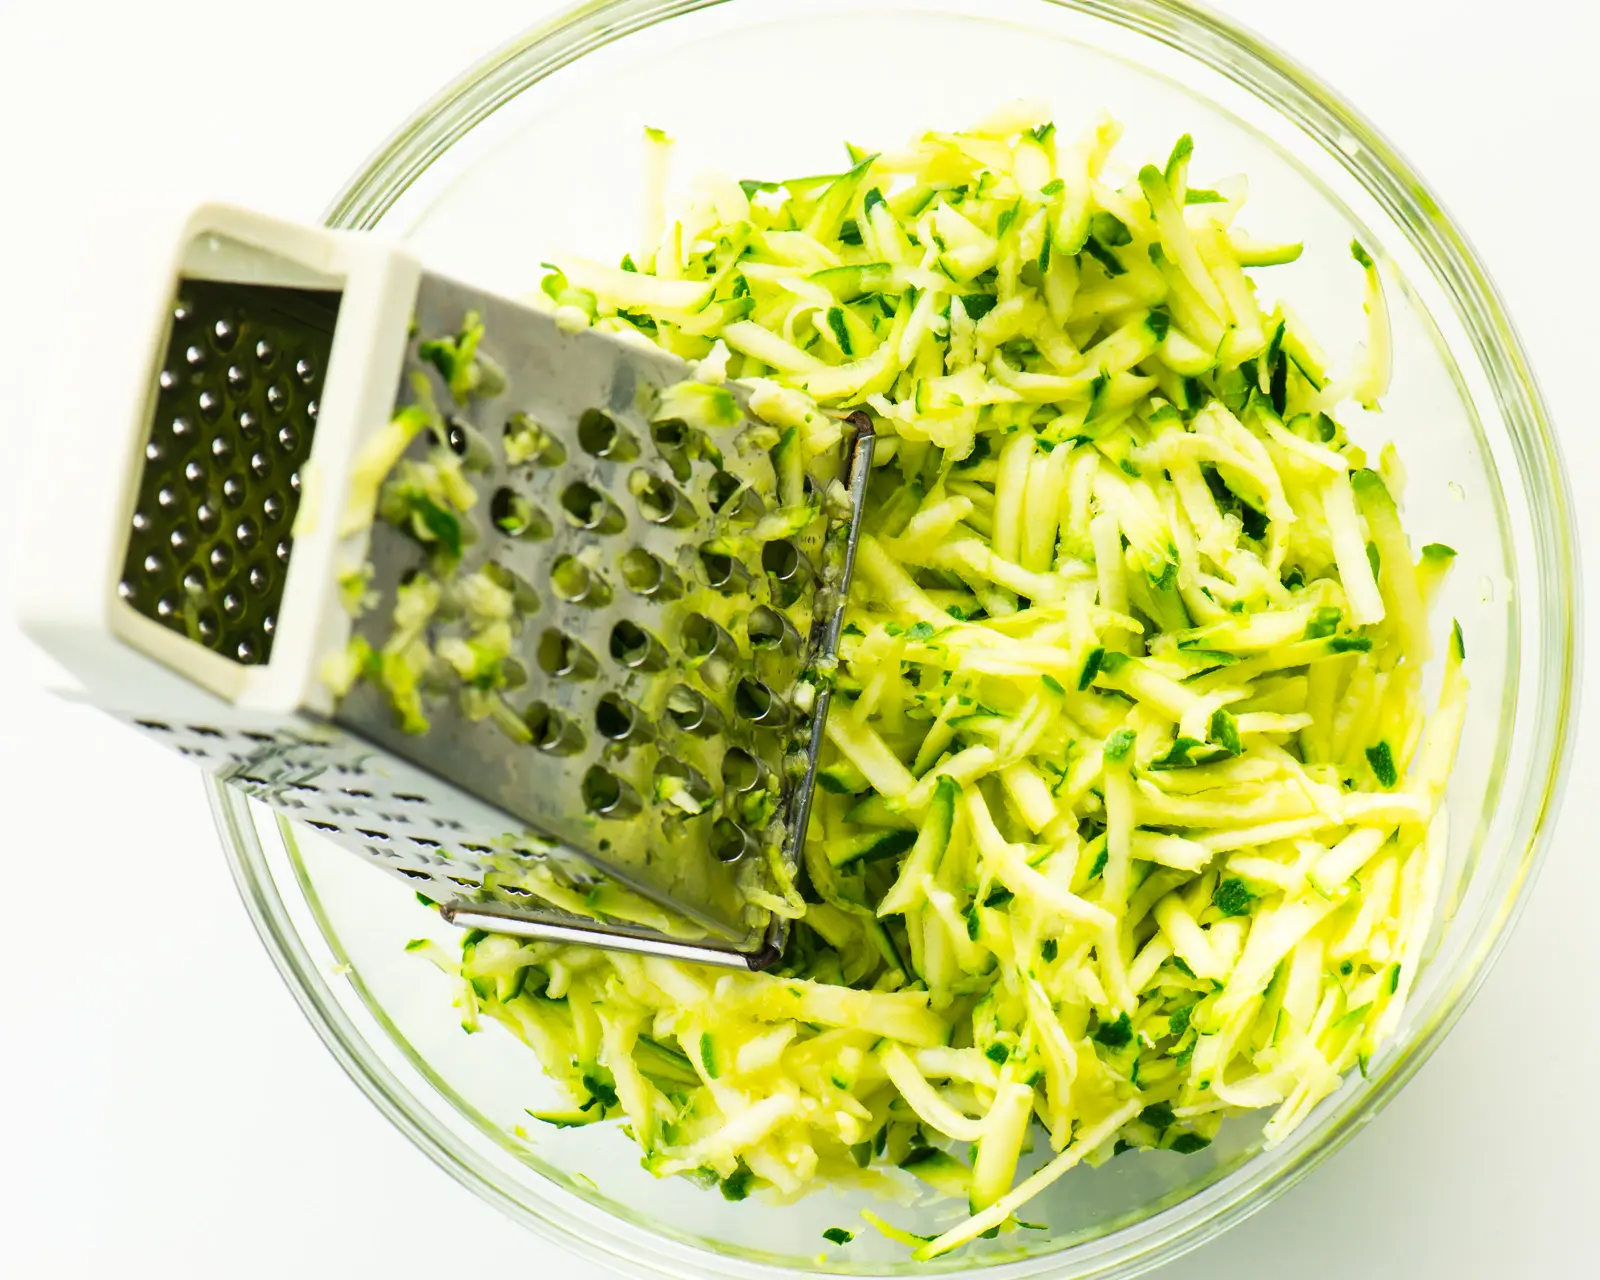 A glass bowl contains shredded zucchini along with a metal shredder.